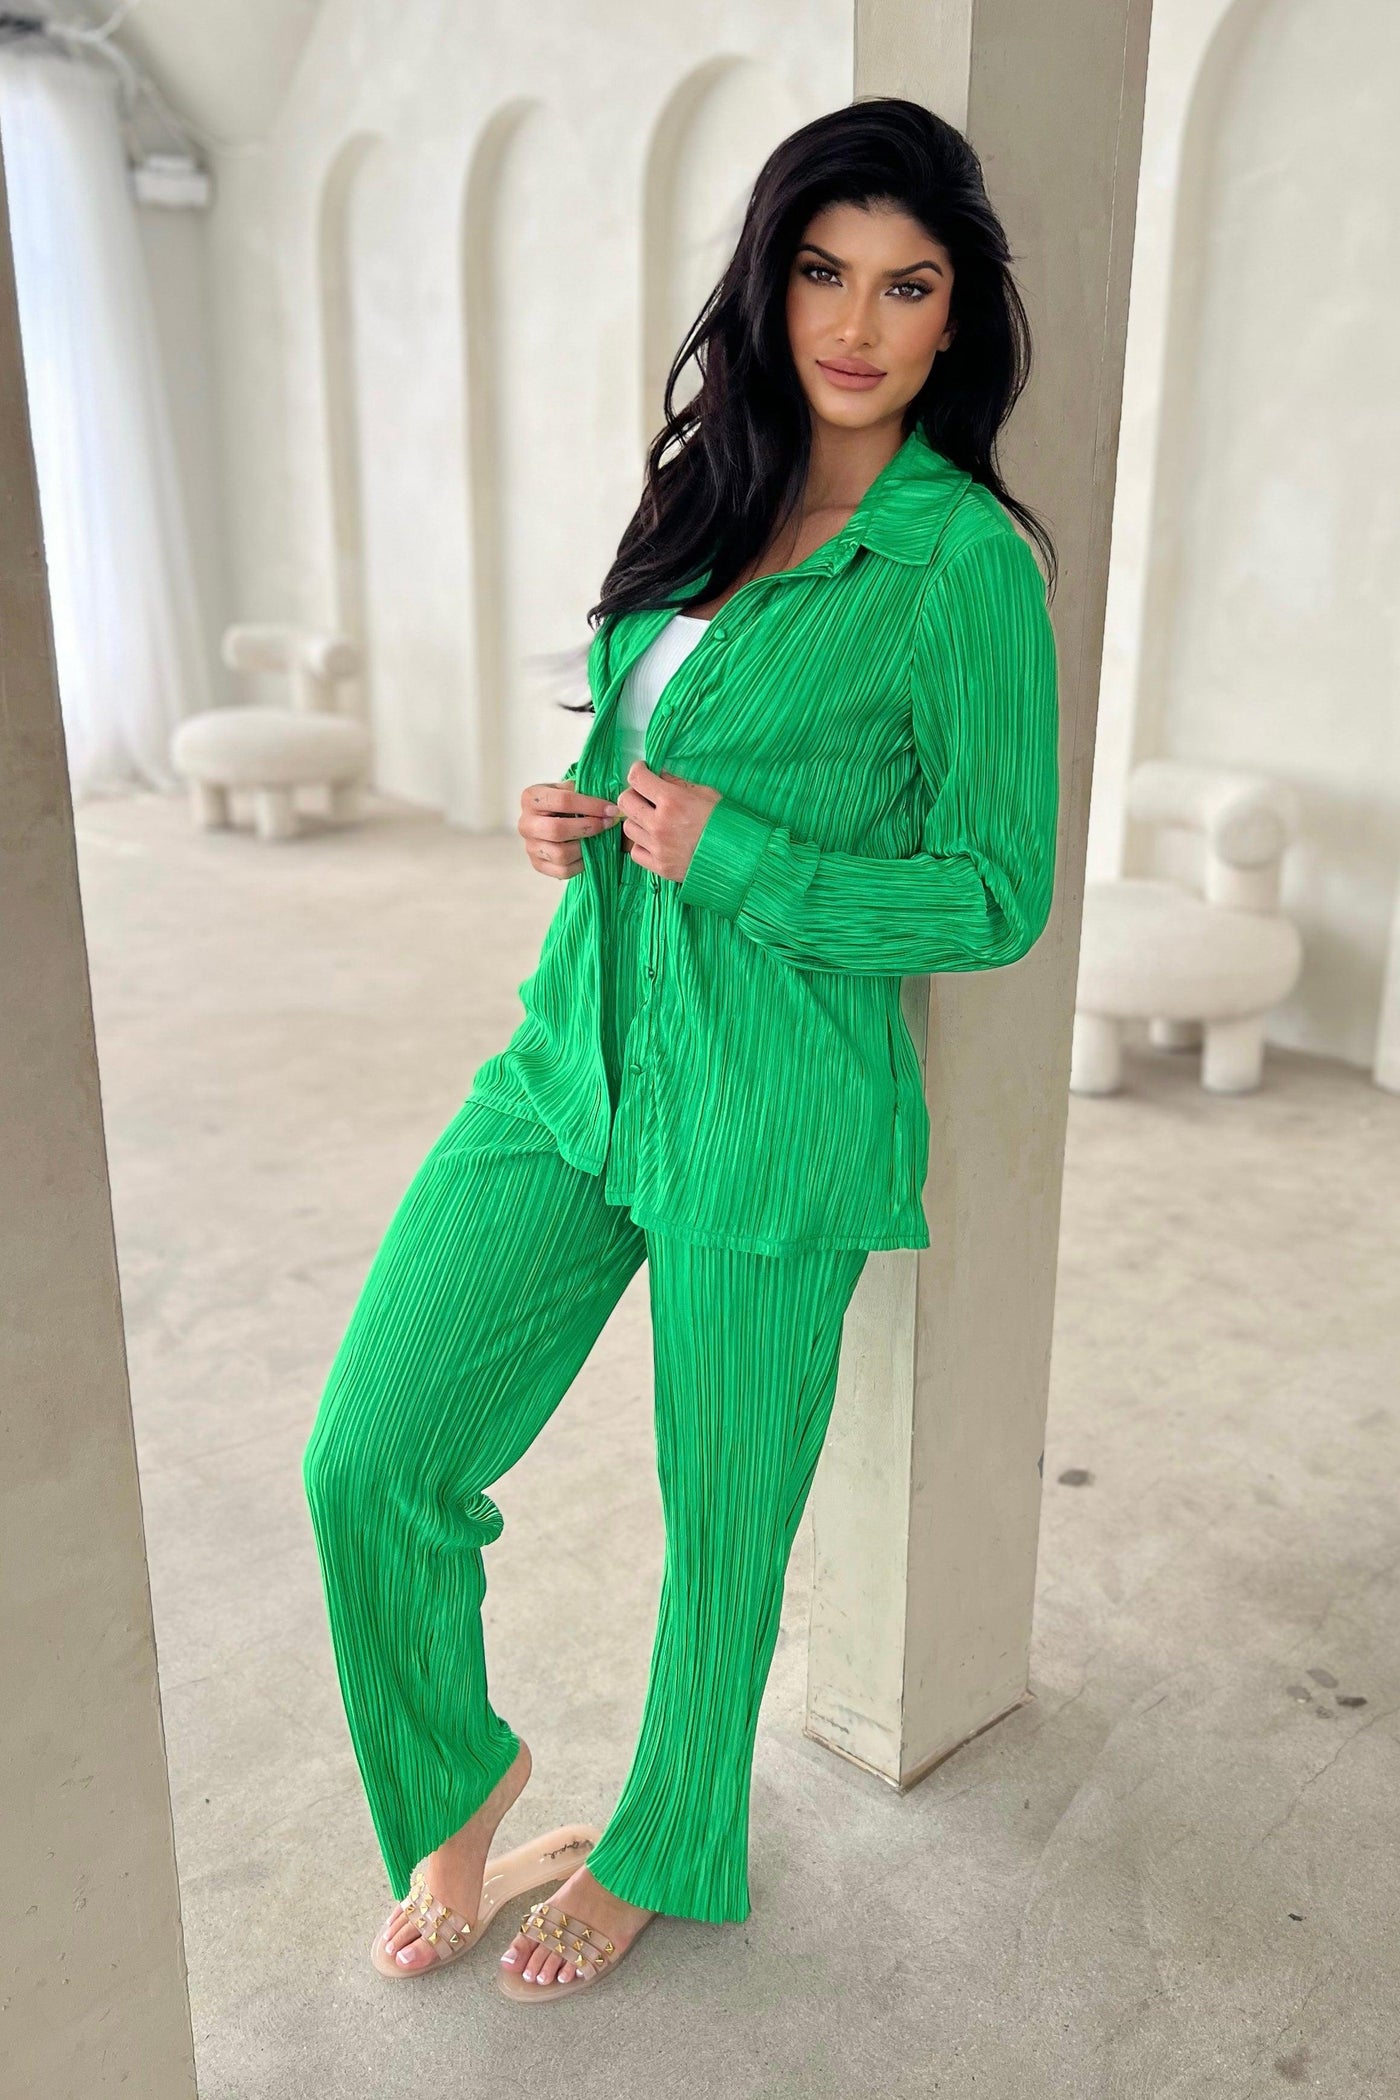 THE "IT GIRL" SET , TOP AND PANT SET , It's NOMB , BRIGHT GREEN SET, KELLY GREEN PLISSE TOP AND PANT SET, KELLY GREEN TOP AND PANT SET, TOP AND PANT AHTLEISURE SET, TOP AND PANT LOUNGE SET , It's NOMB , itsnomb.com